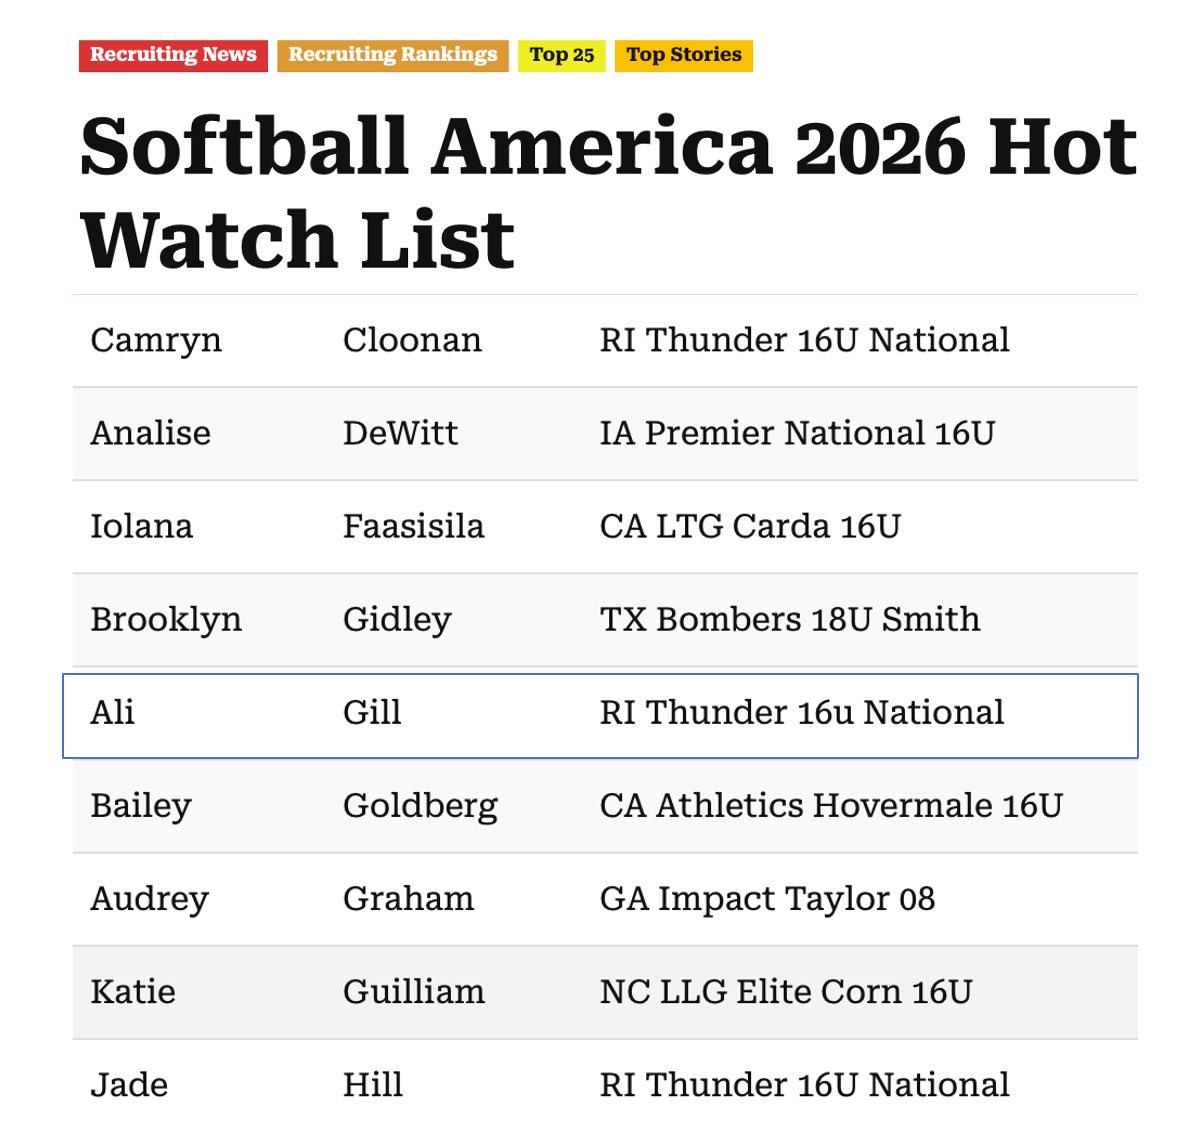 Thank you ⁦@softballamerica⁩ for recognizing me! It’s an honor to be included with these great players! Congrats ⁦⁦@AvaPapaleo⁩ ⁦@Hill2026Jade⁩ ⁦⁦@CamrynCloonan⁩ 💪💙!⁦@RITG16unational⁩ ⁦@thunderjam134⁩ ⁦@BobRossiRITG⁩ ⁦